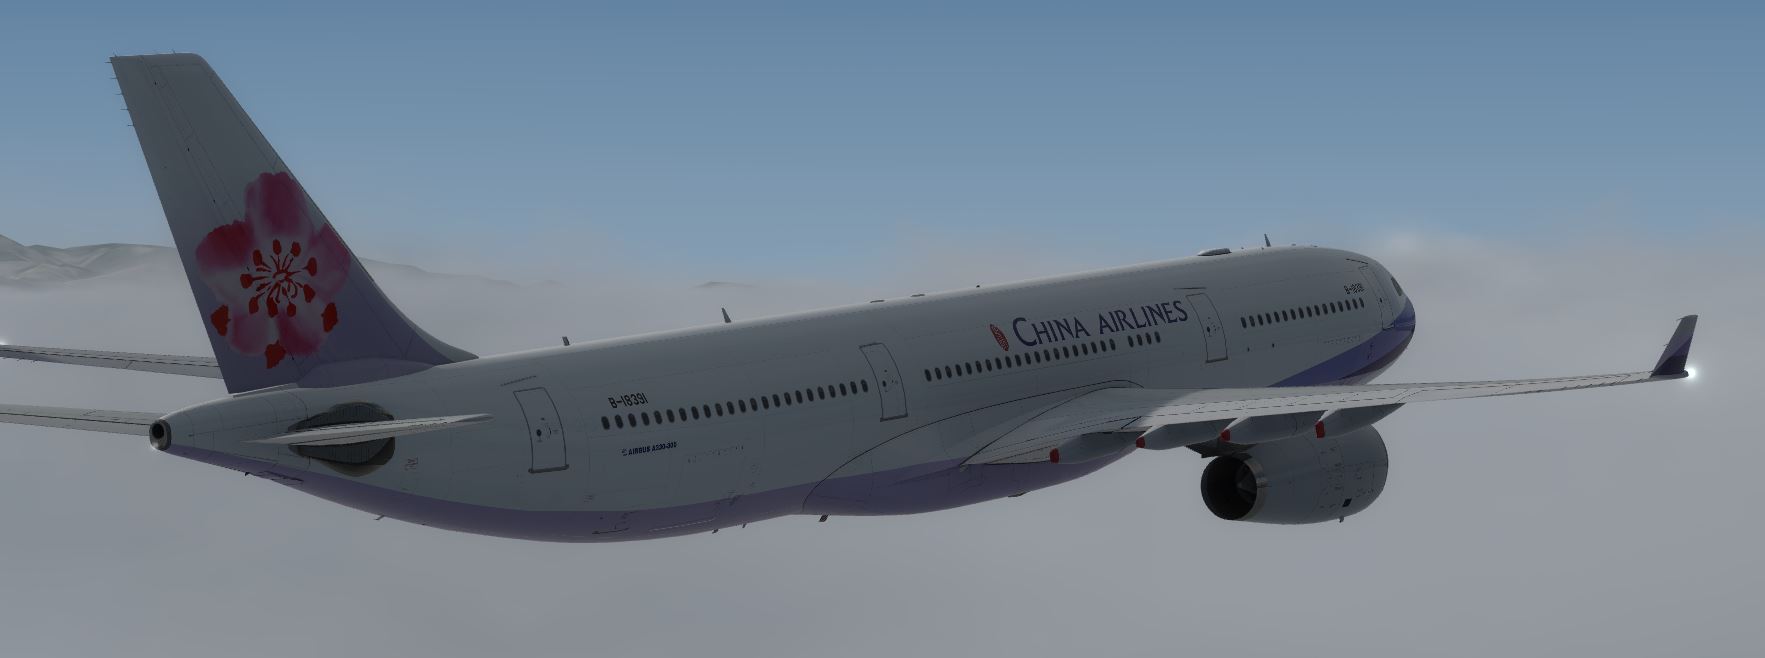 AS A330 ChinaAirline-6923 